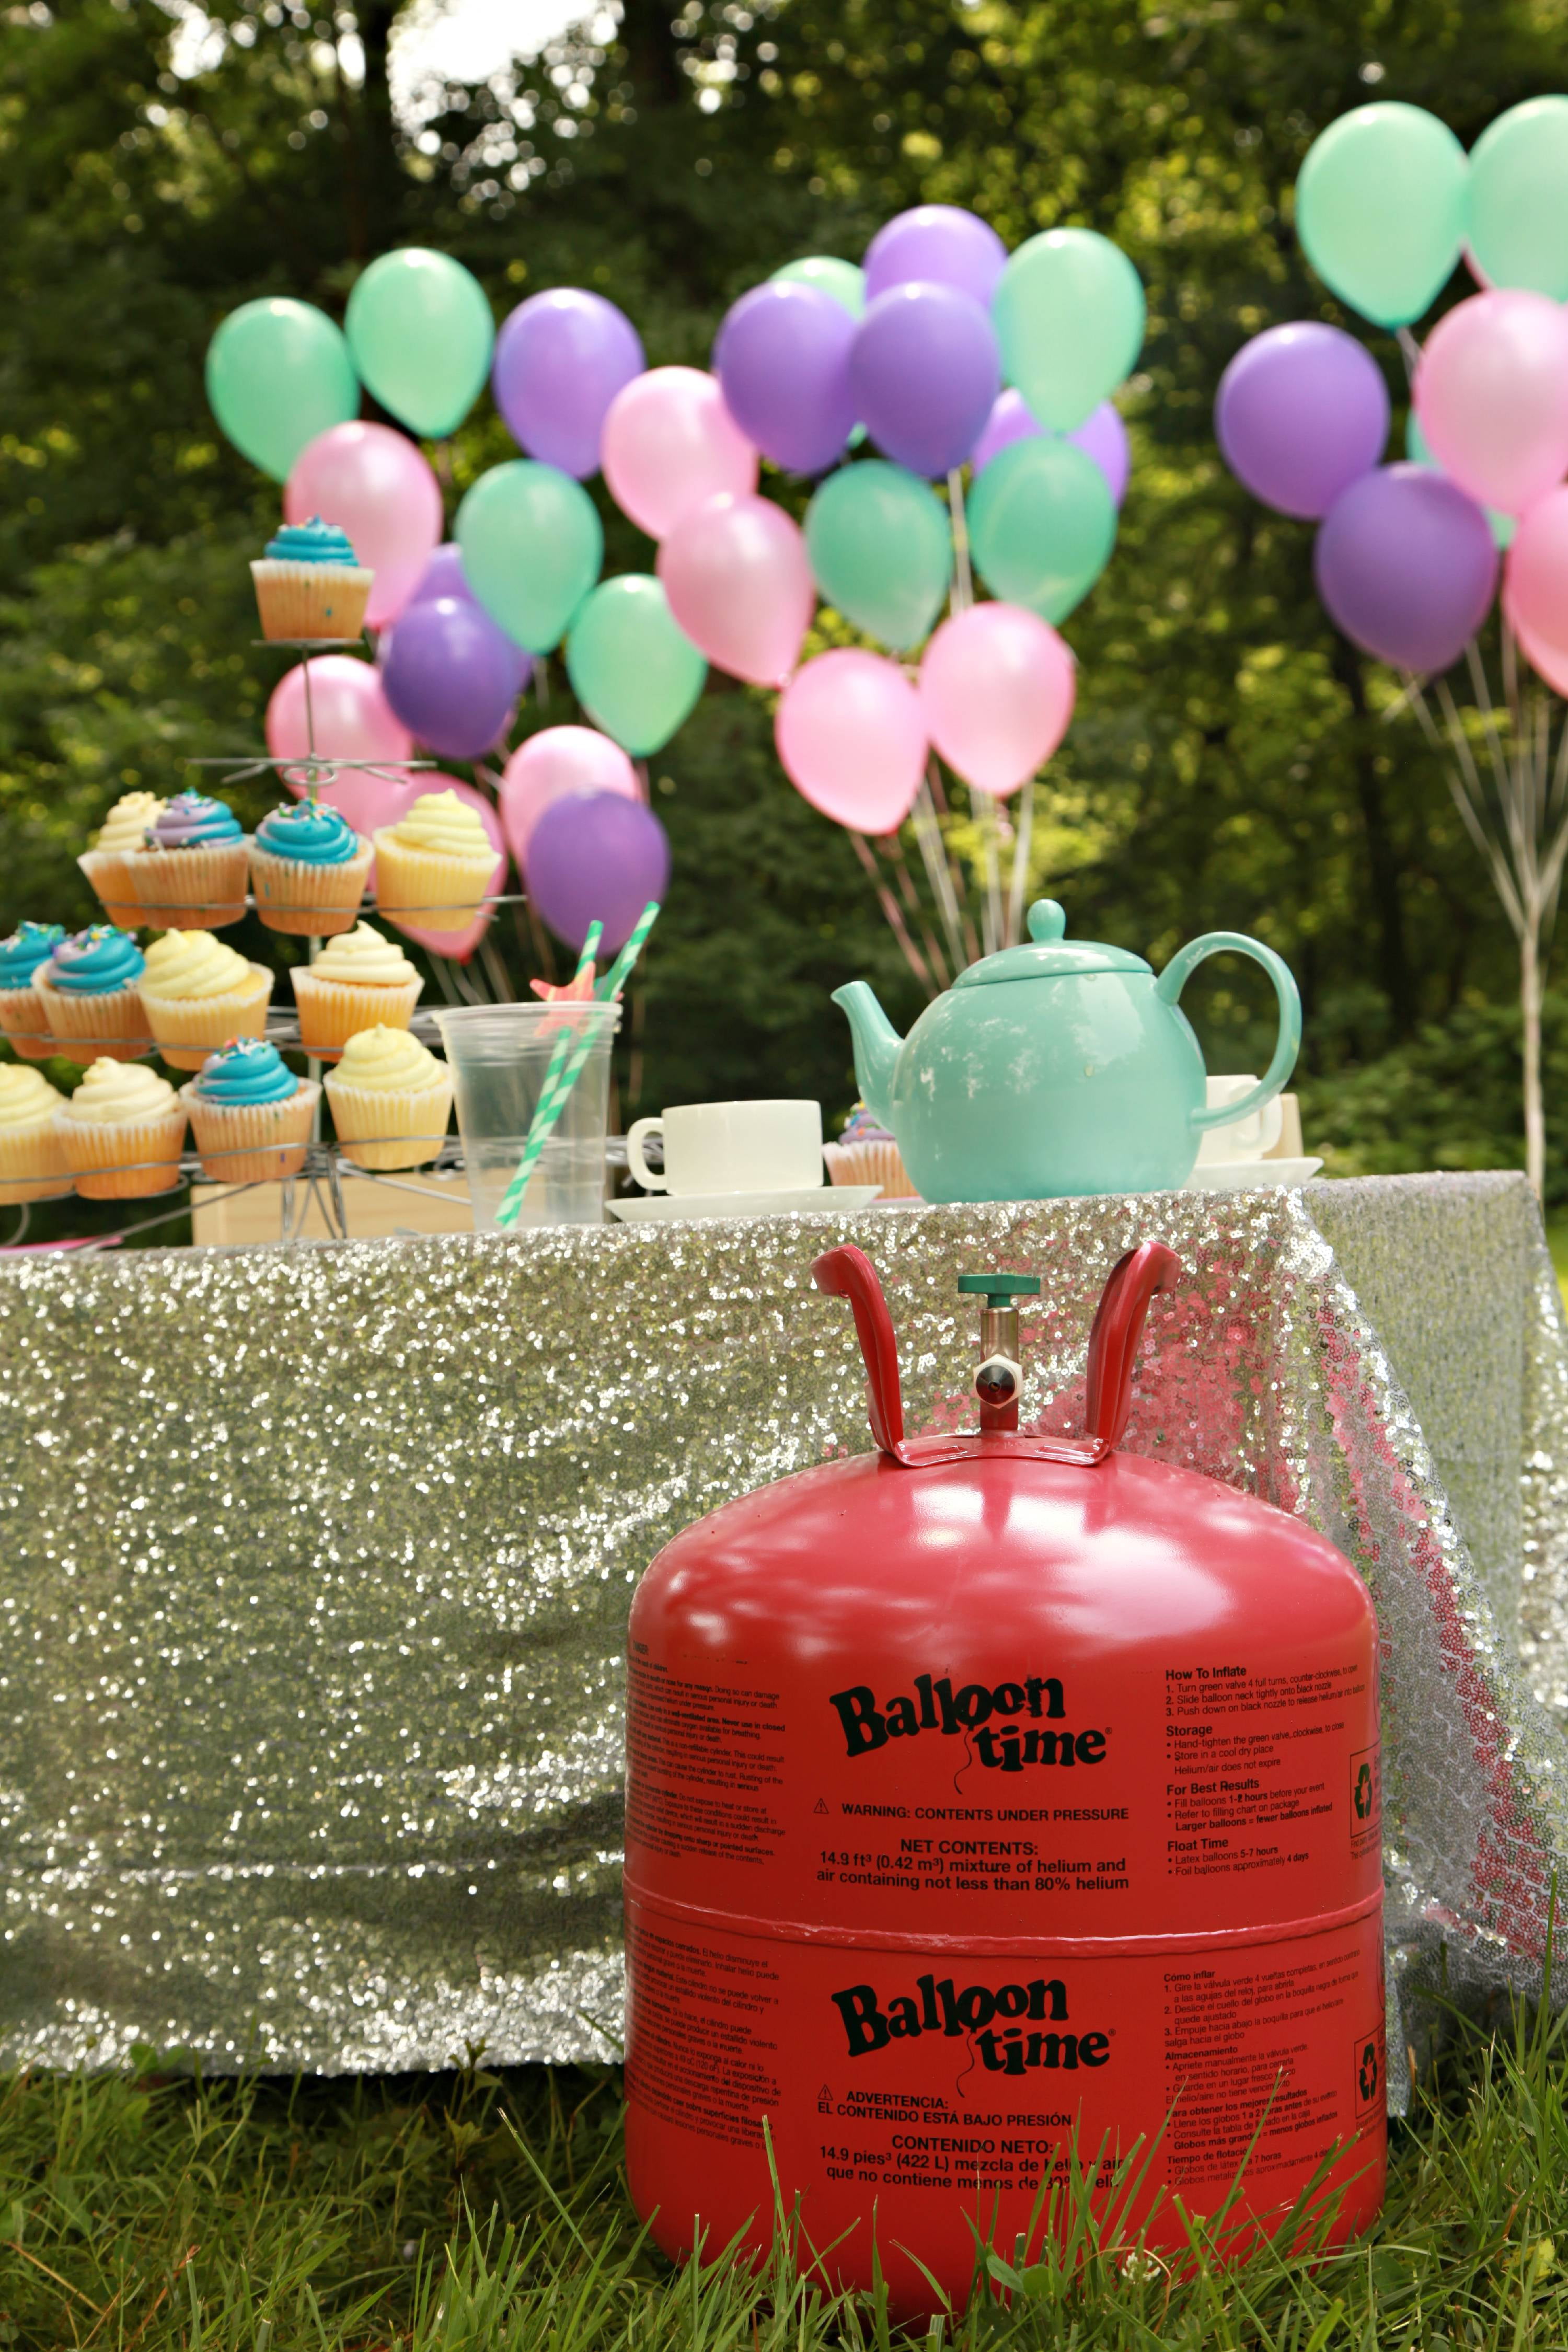 Supposed to Own Miles Balloon Time Jumbo Helium Tank, 14.9 Cu Ft Includes Ribbon (Balloons are  Not Included) - Walmart.com - Walmart.com